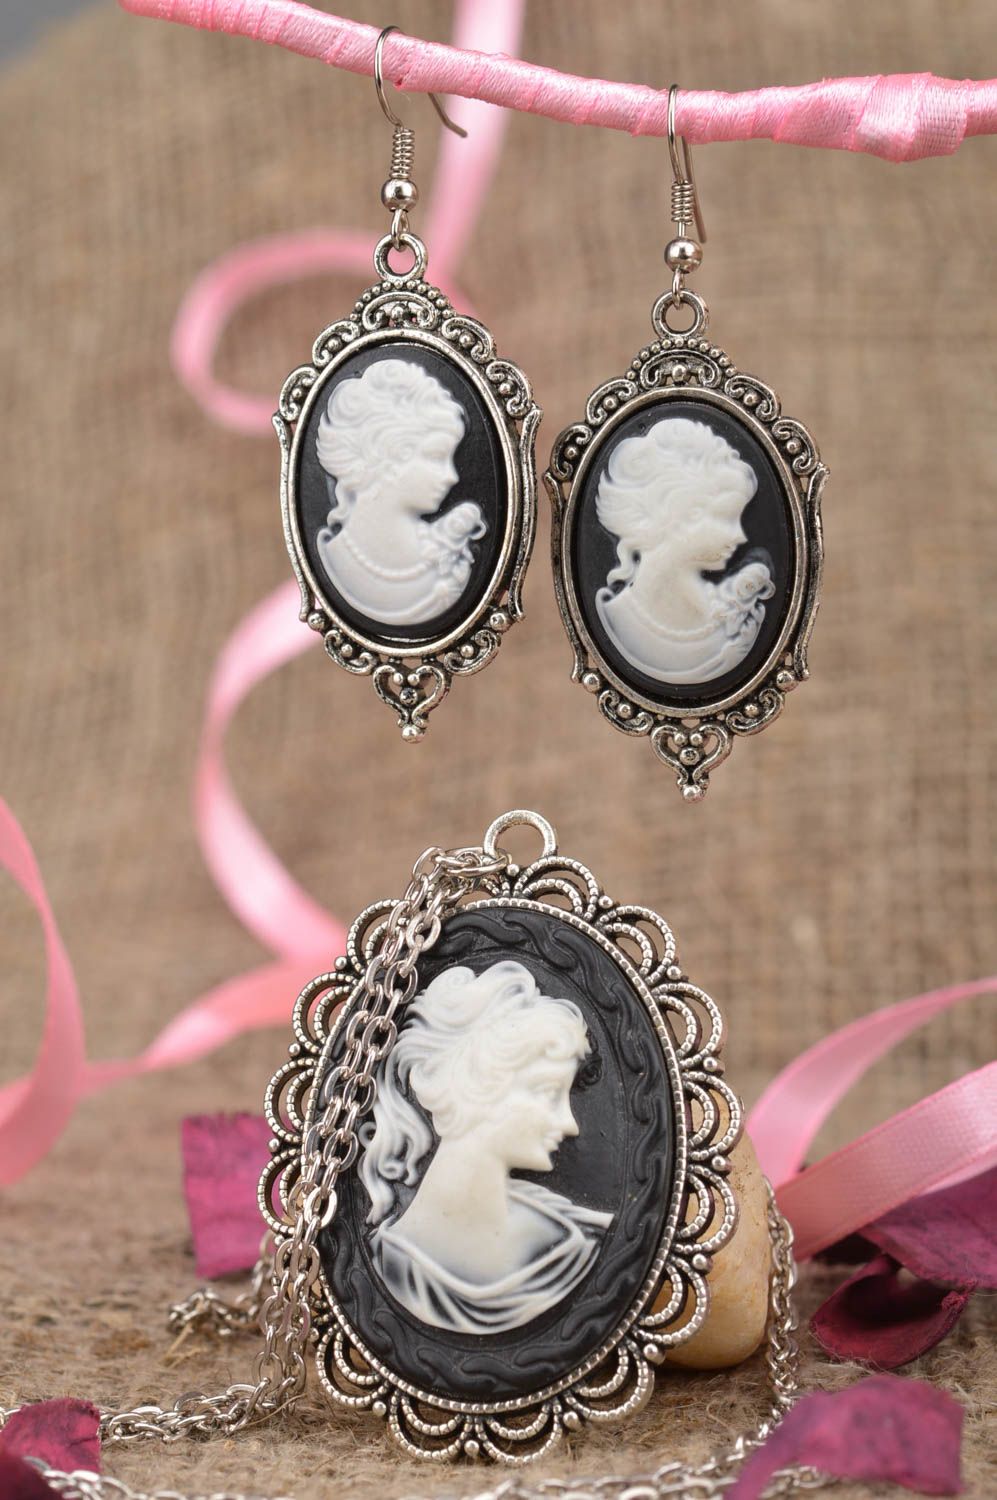 Handmade set of jewelry 2 accessories earrings and pendant with cameos photo 5